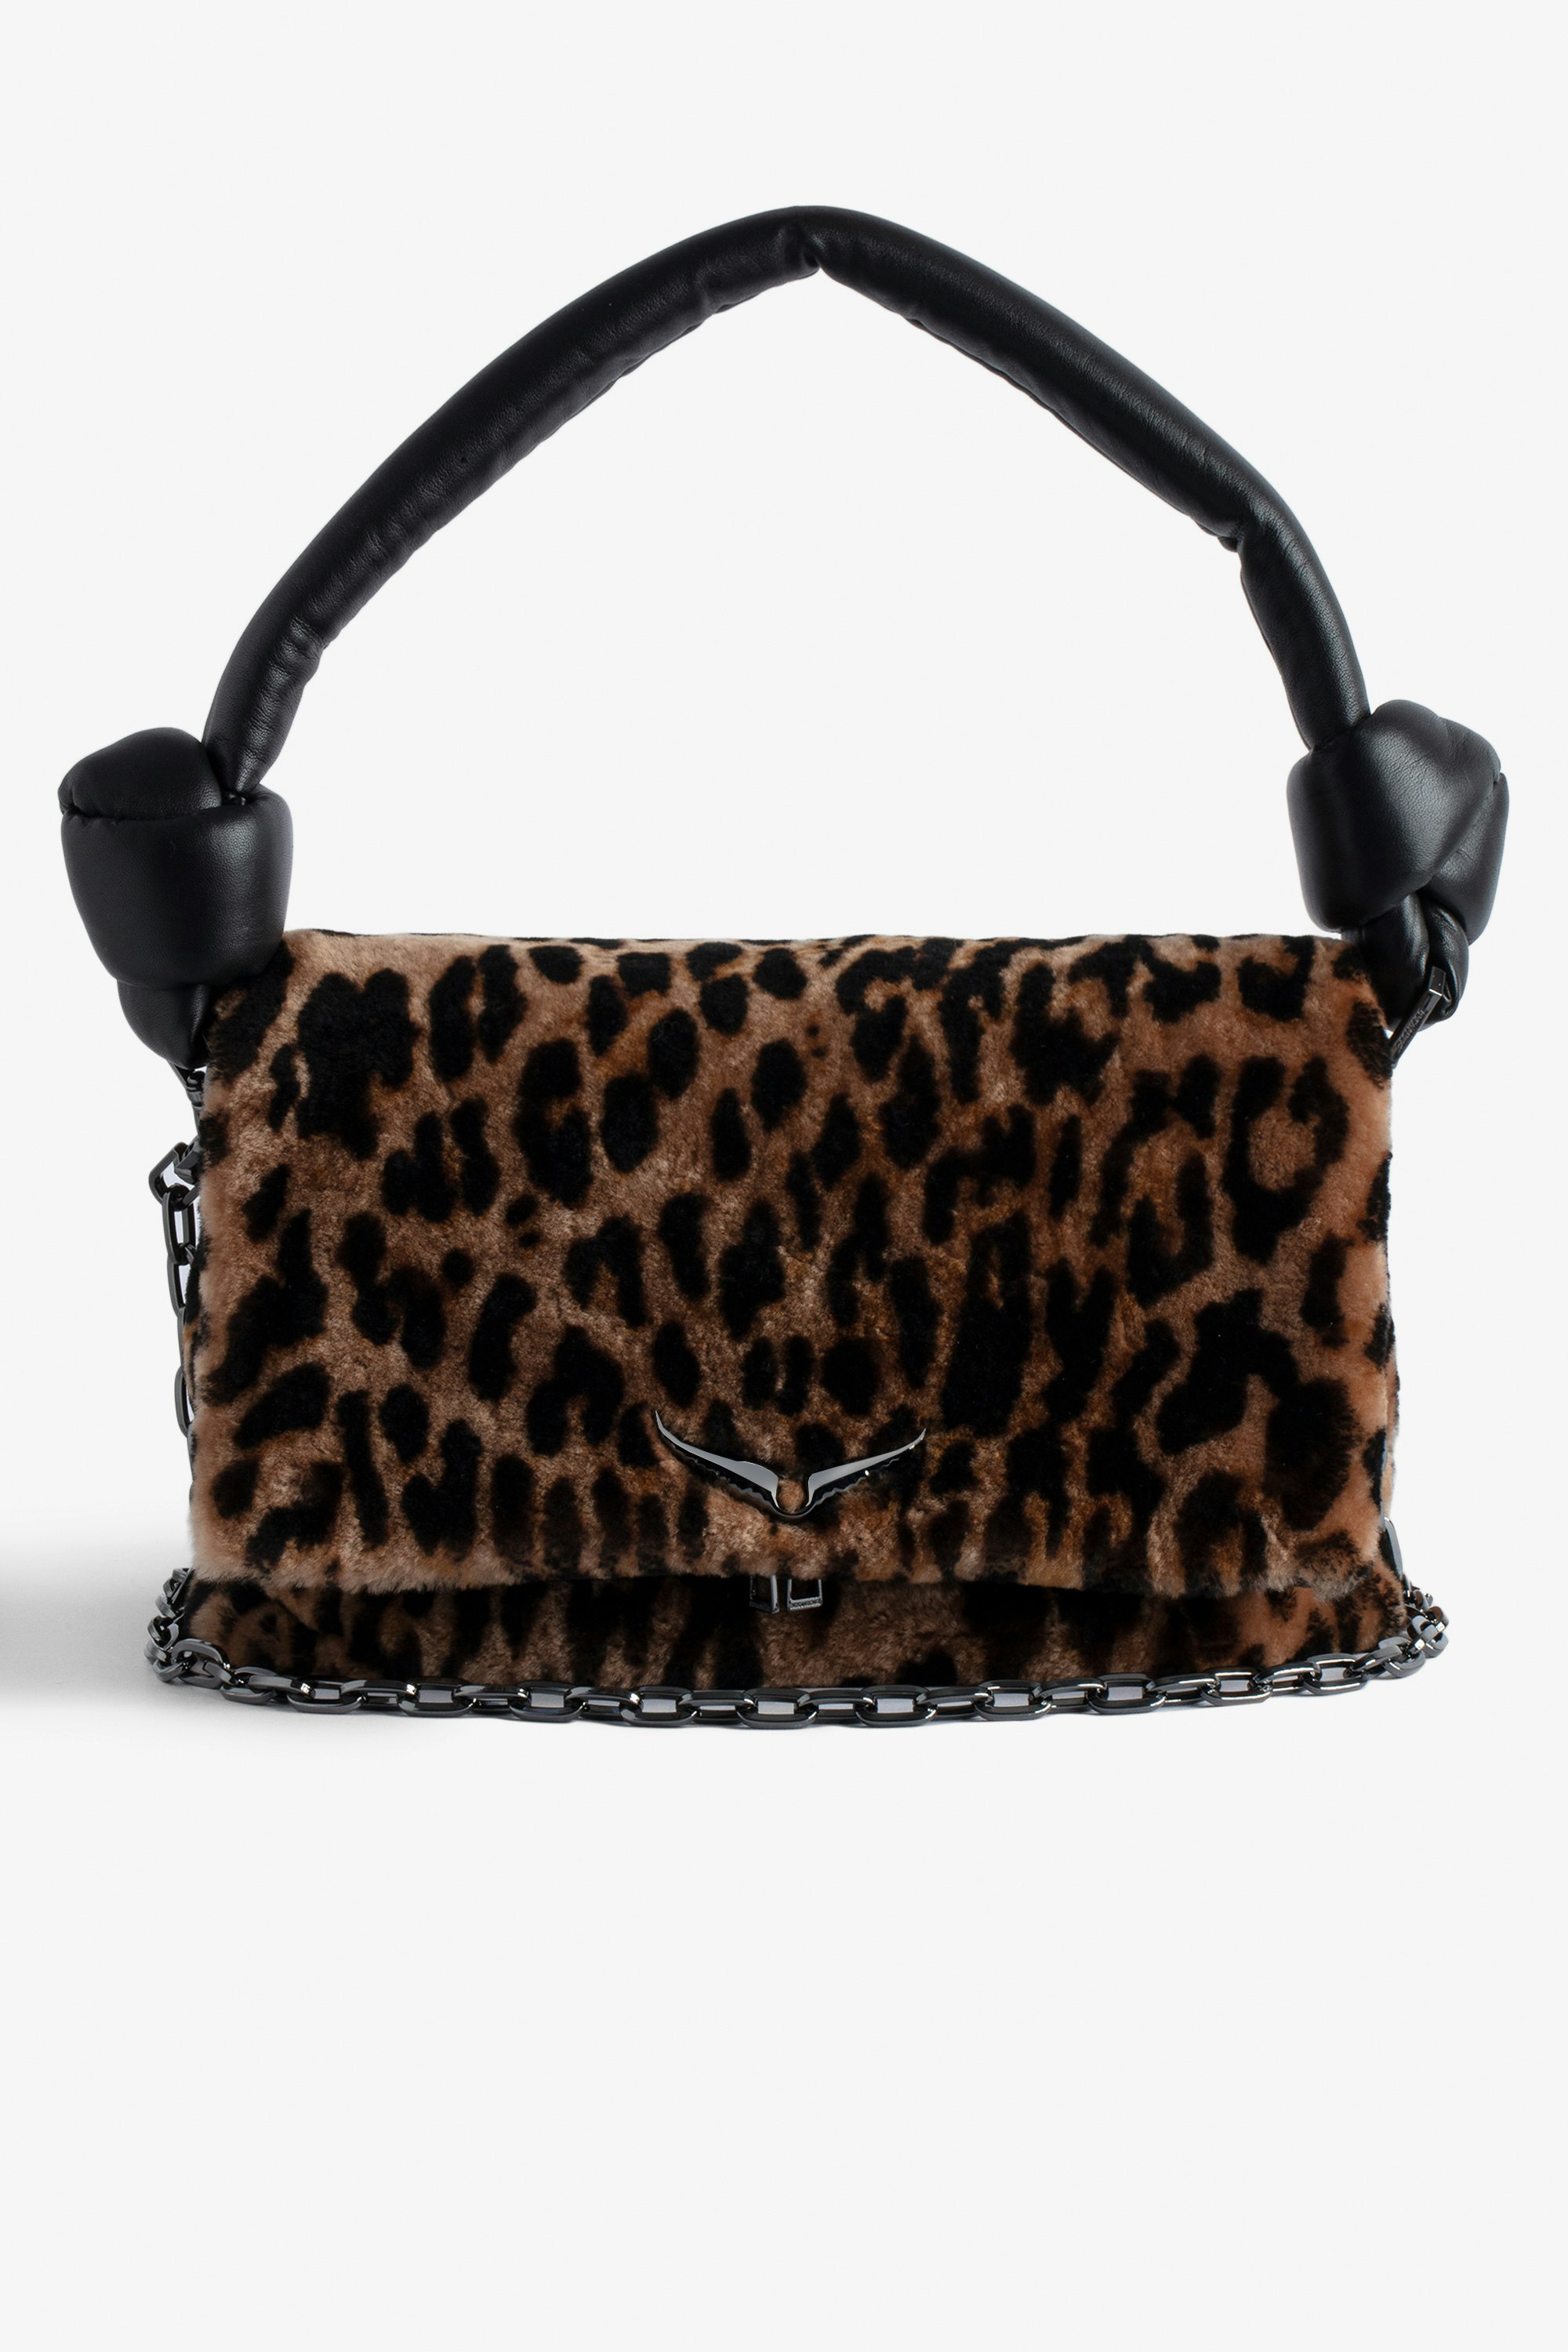 Rocky Eternal Leopard Bag - Women’s brown leopard-print shearling bag with tied shoulder strap, chain and wings charm.